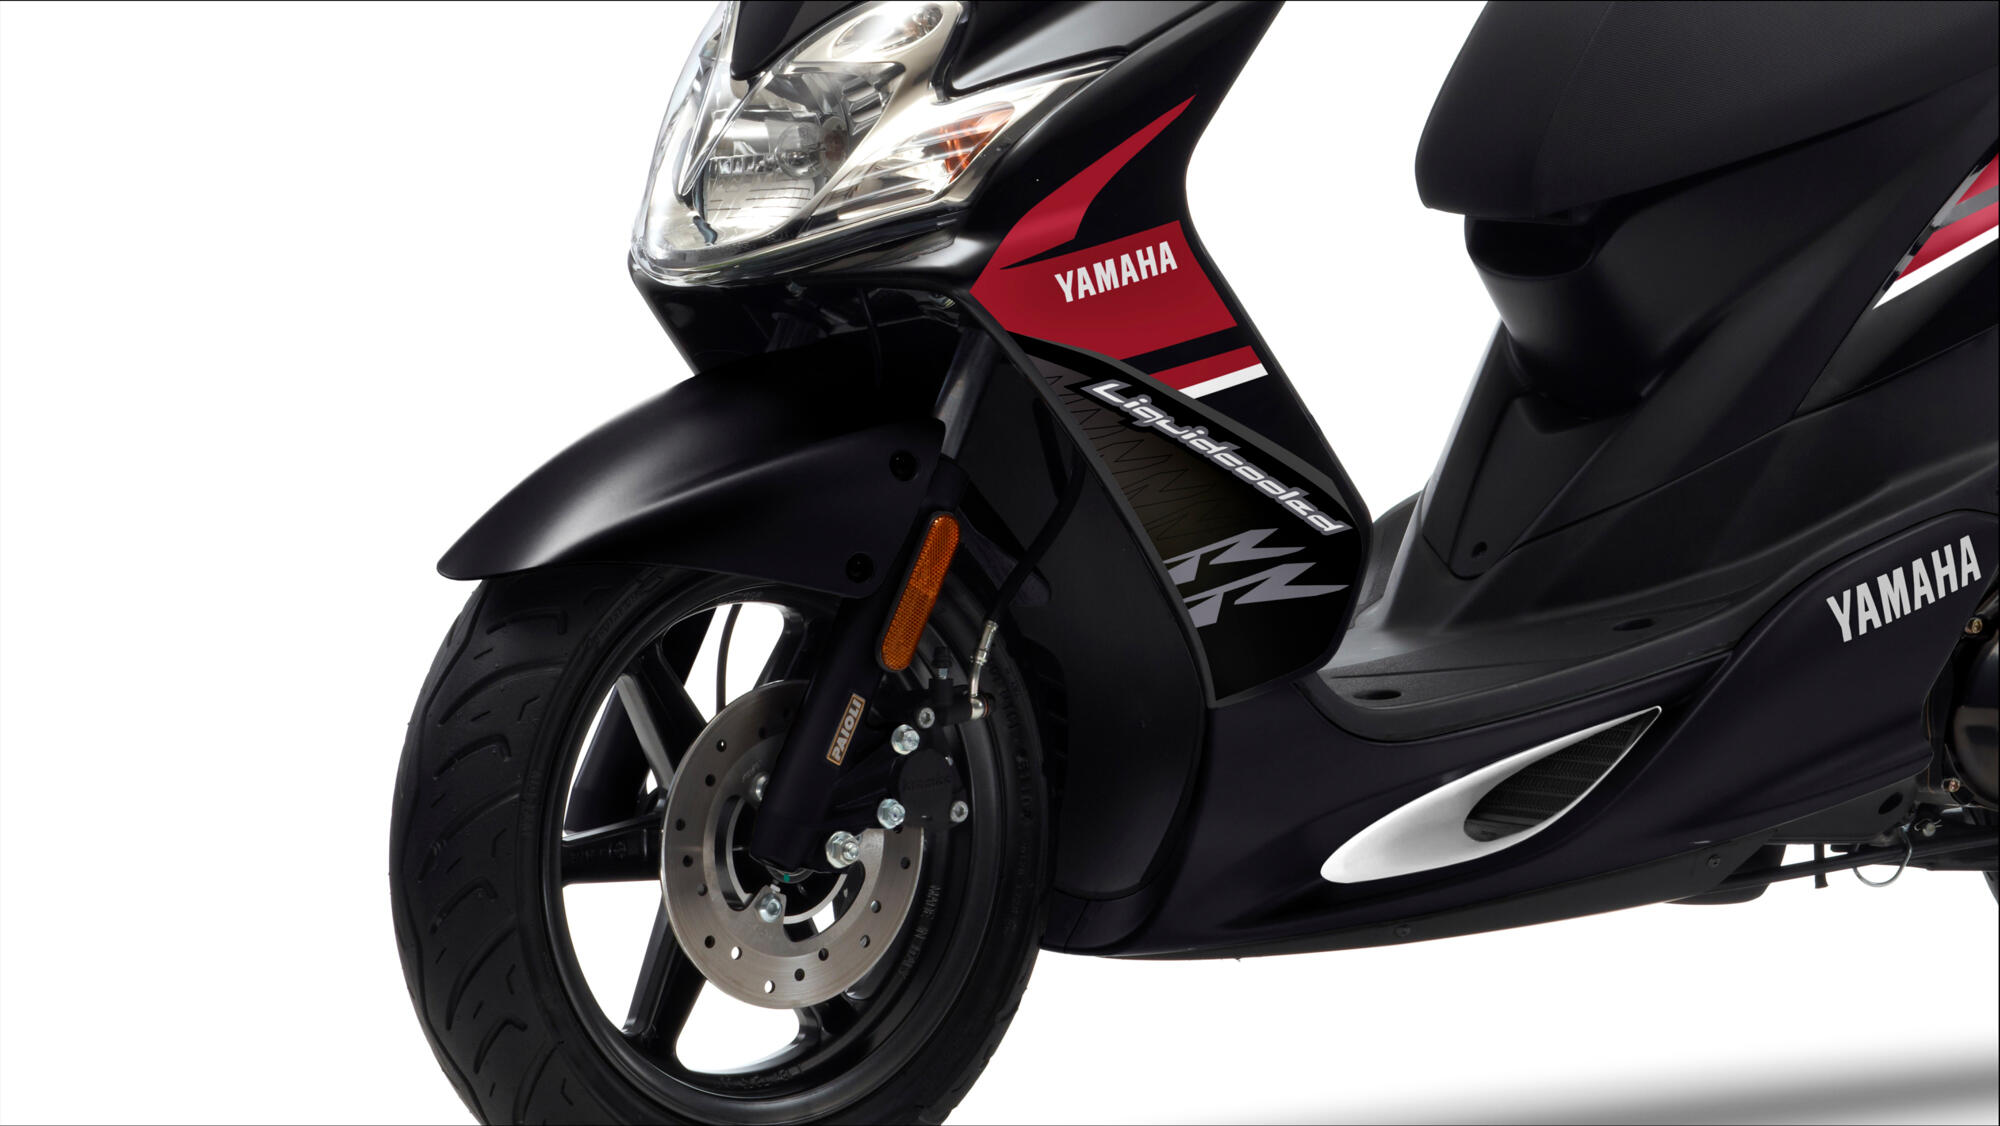 Yamaha Jogrr 2016 Features And Technical Specifications